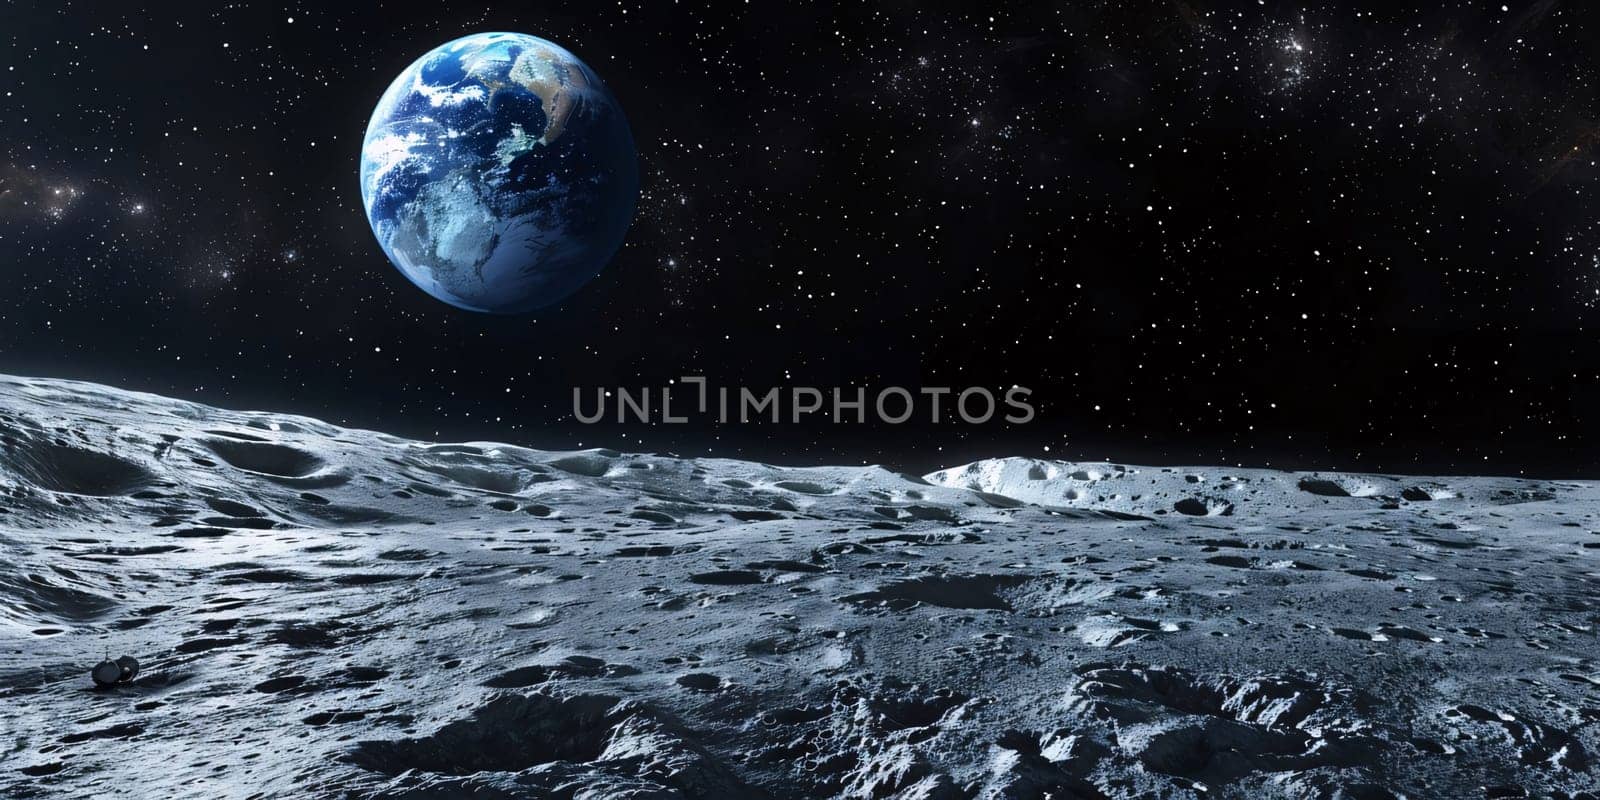 View of the planet Earth from the moon in outer space showing the beauty of space exploration. by ThemesS